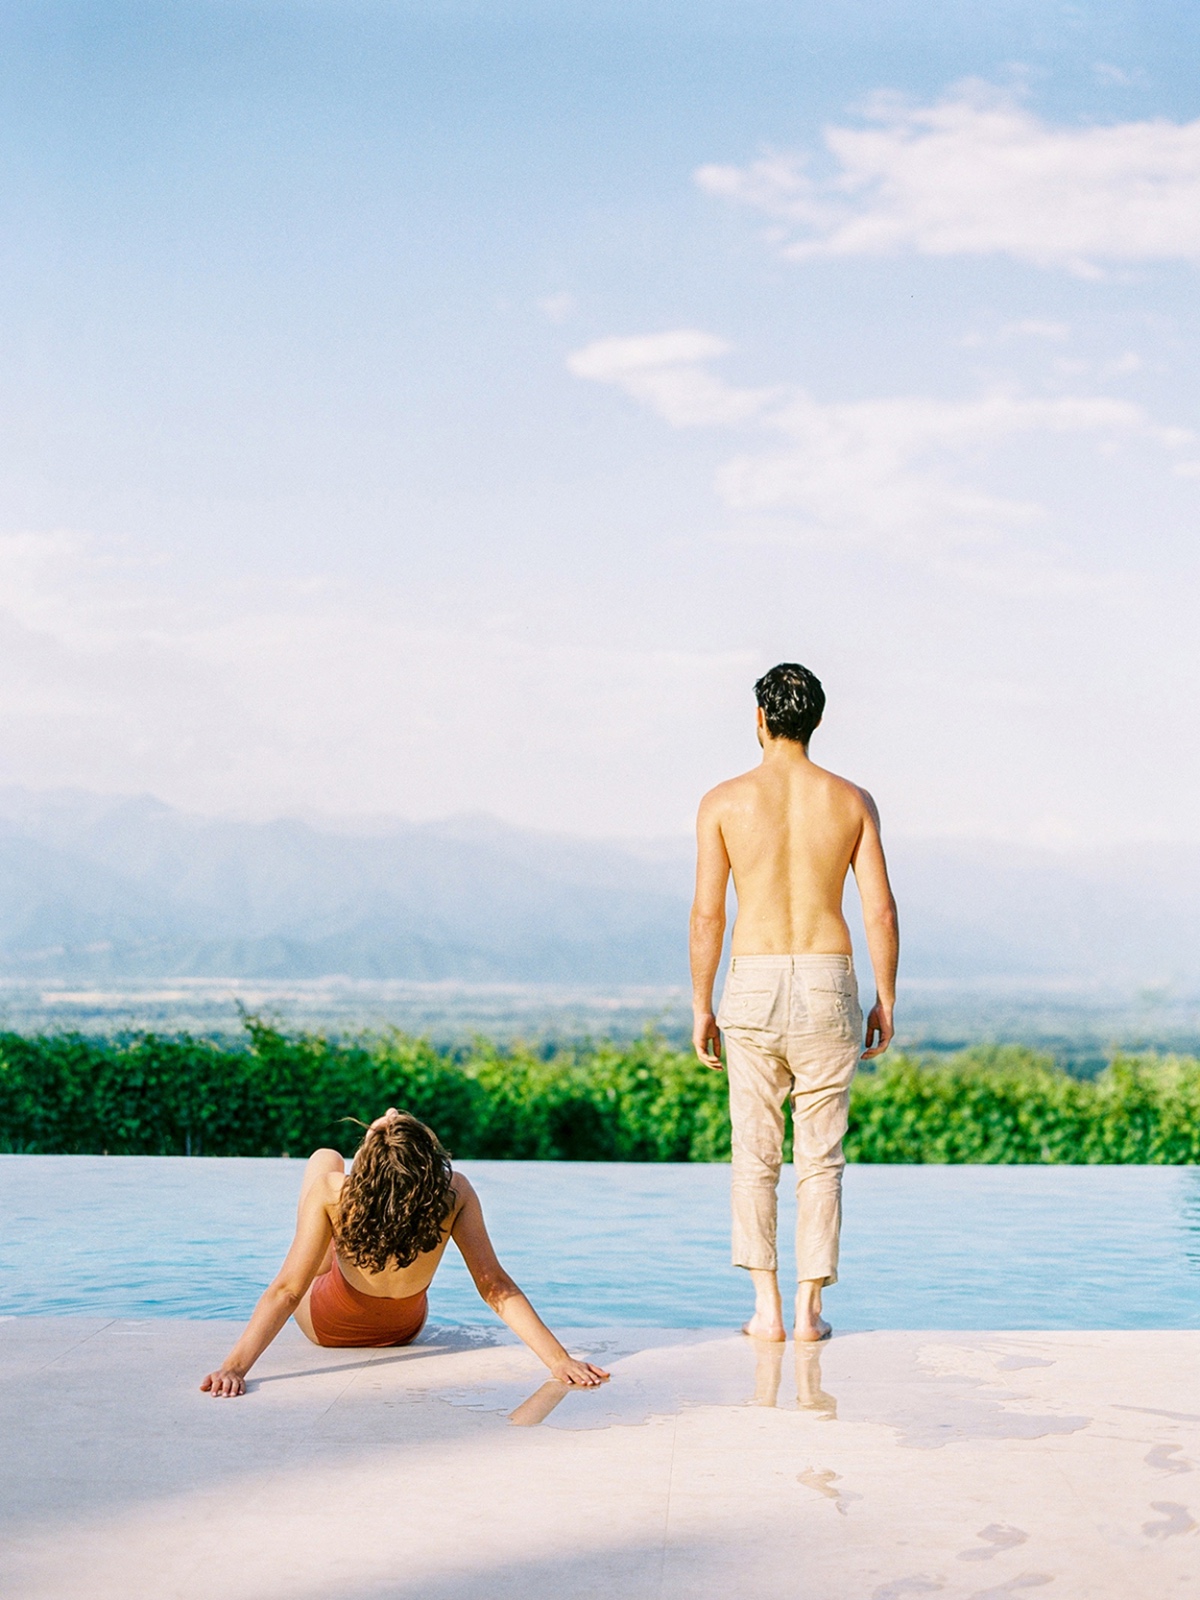 Why You Need To Hire A Photographer For Your Honeymoon